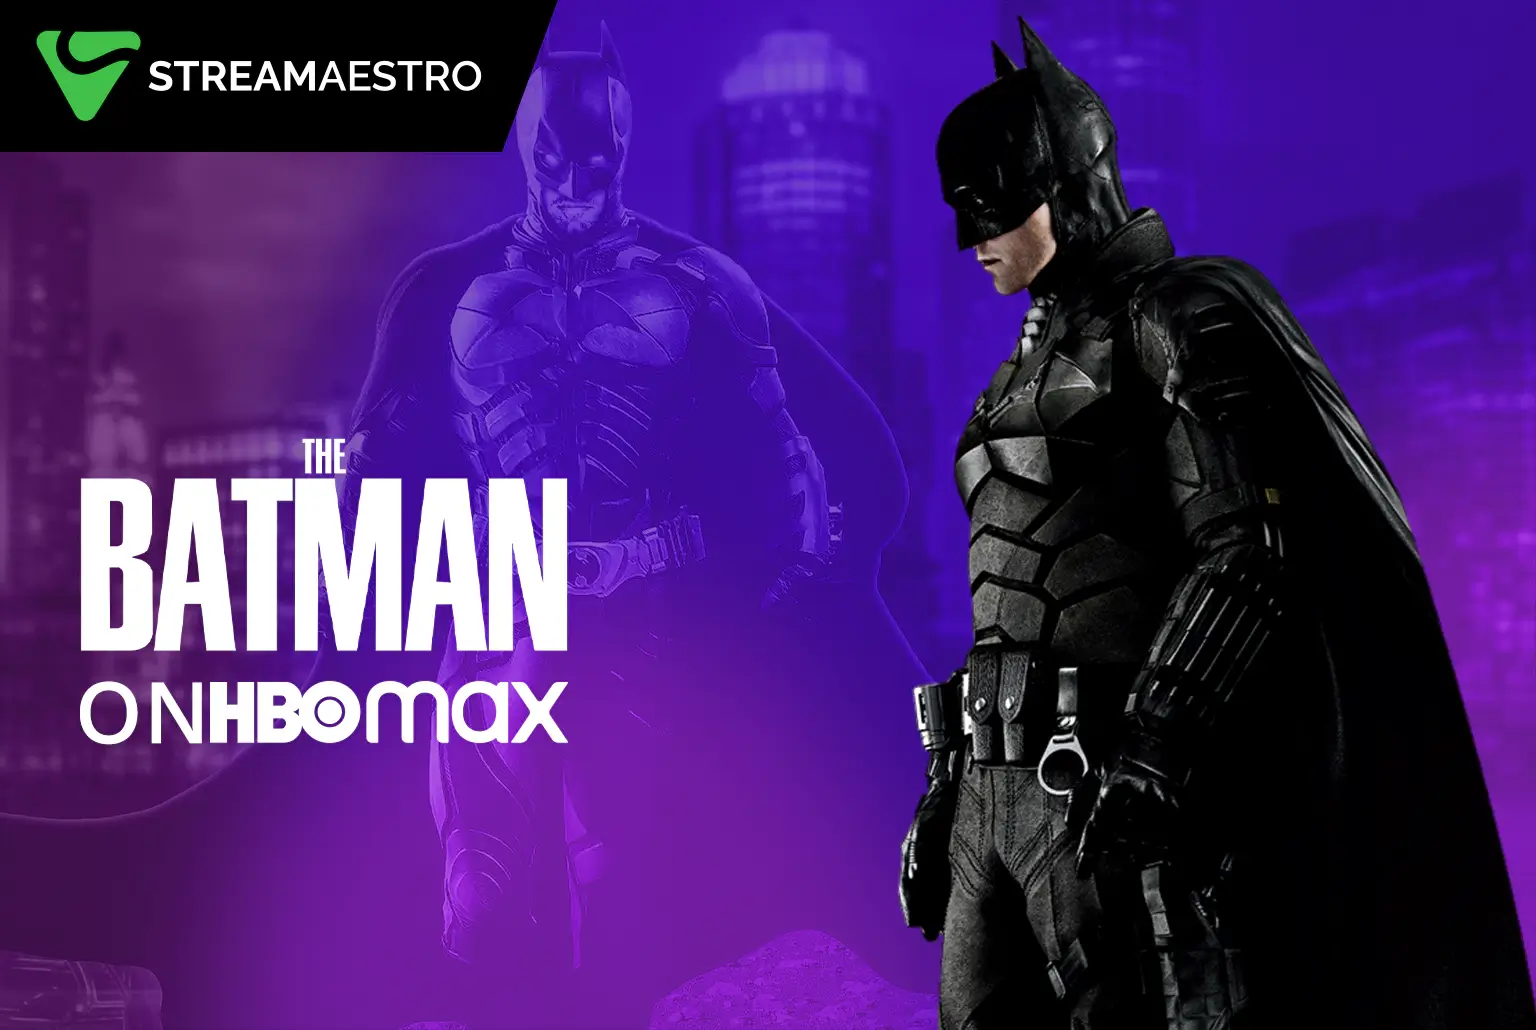 The Batman on HBO Max